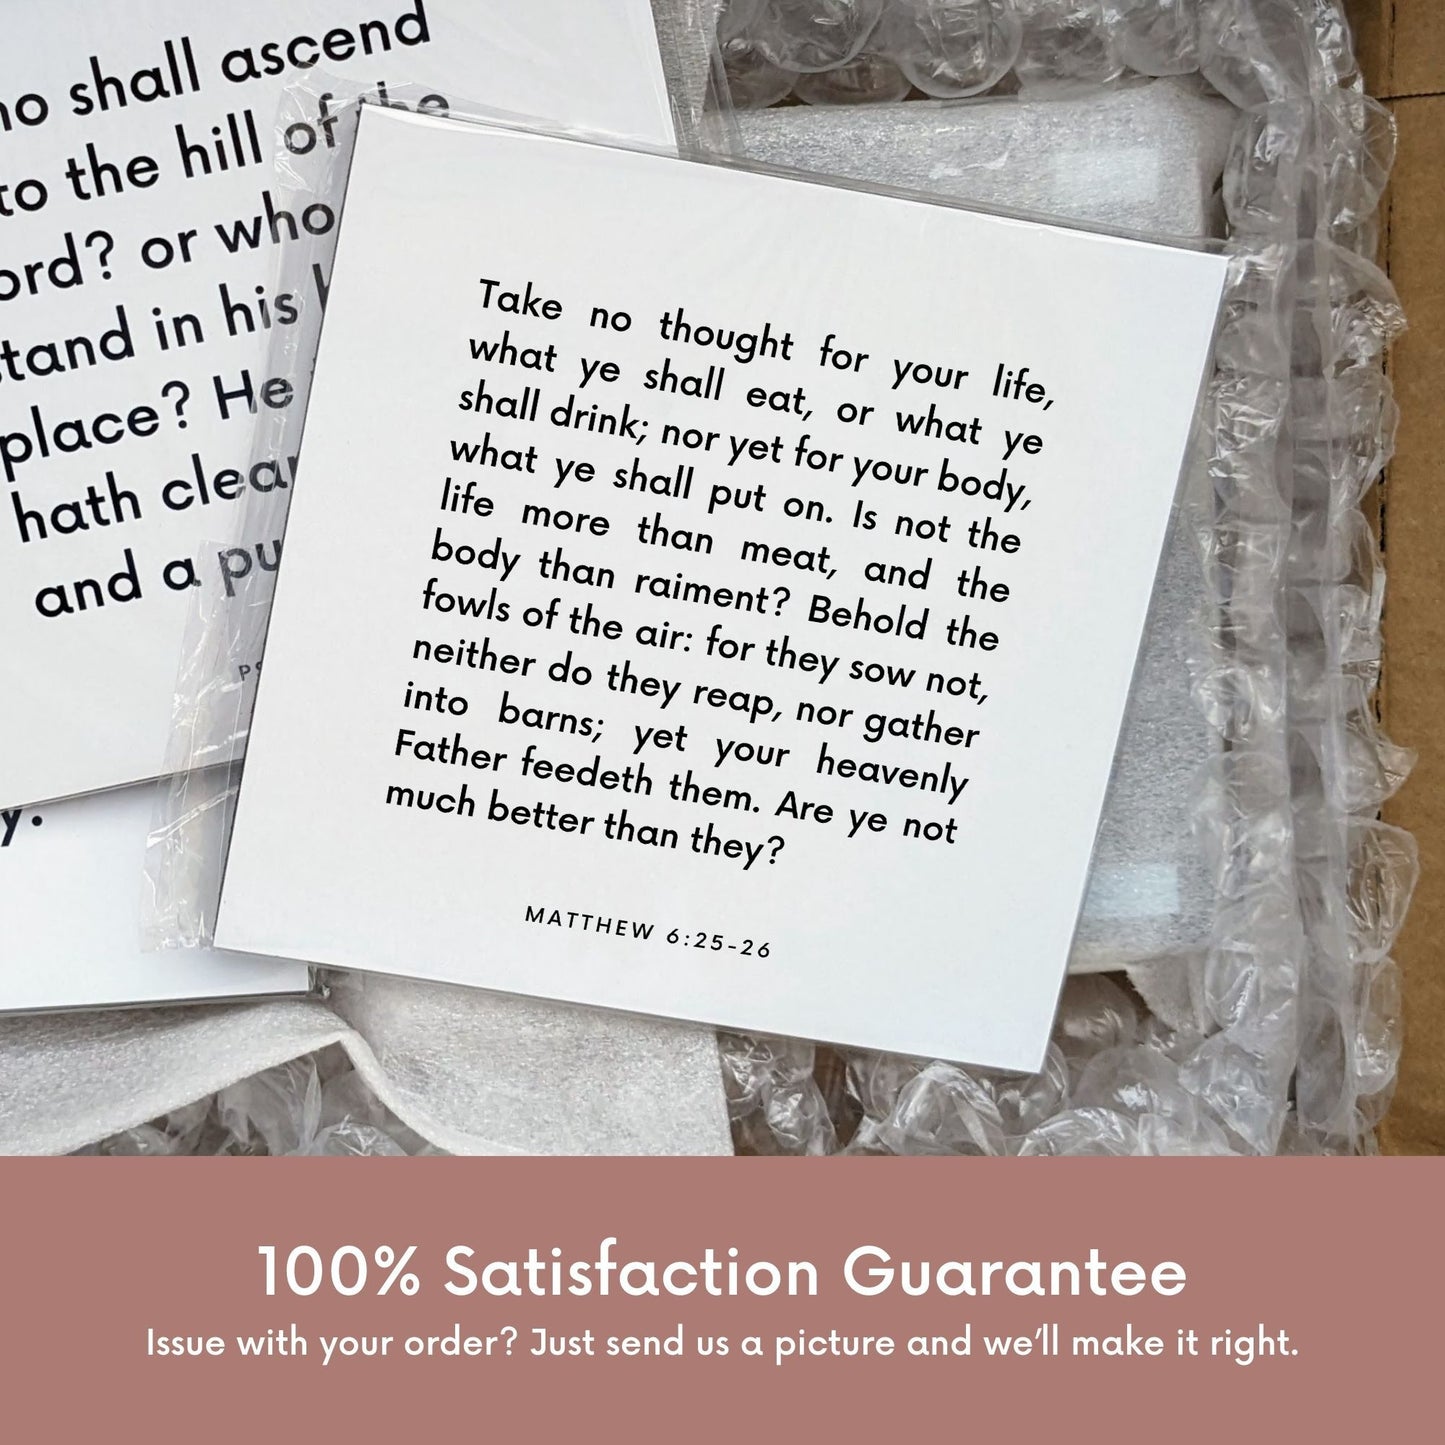 Shipping materials for scripture tile of Matthew 6:25-26 - "Take no thought for your life, what ye shall eat"